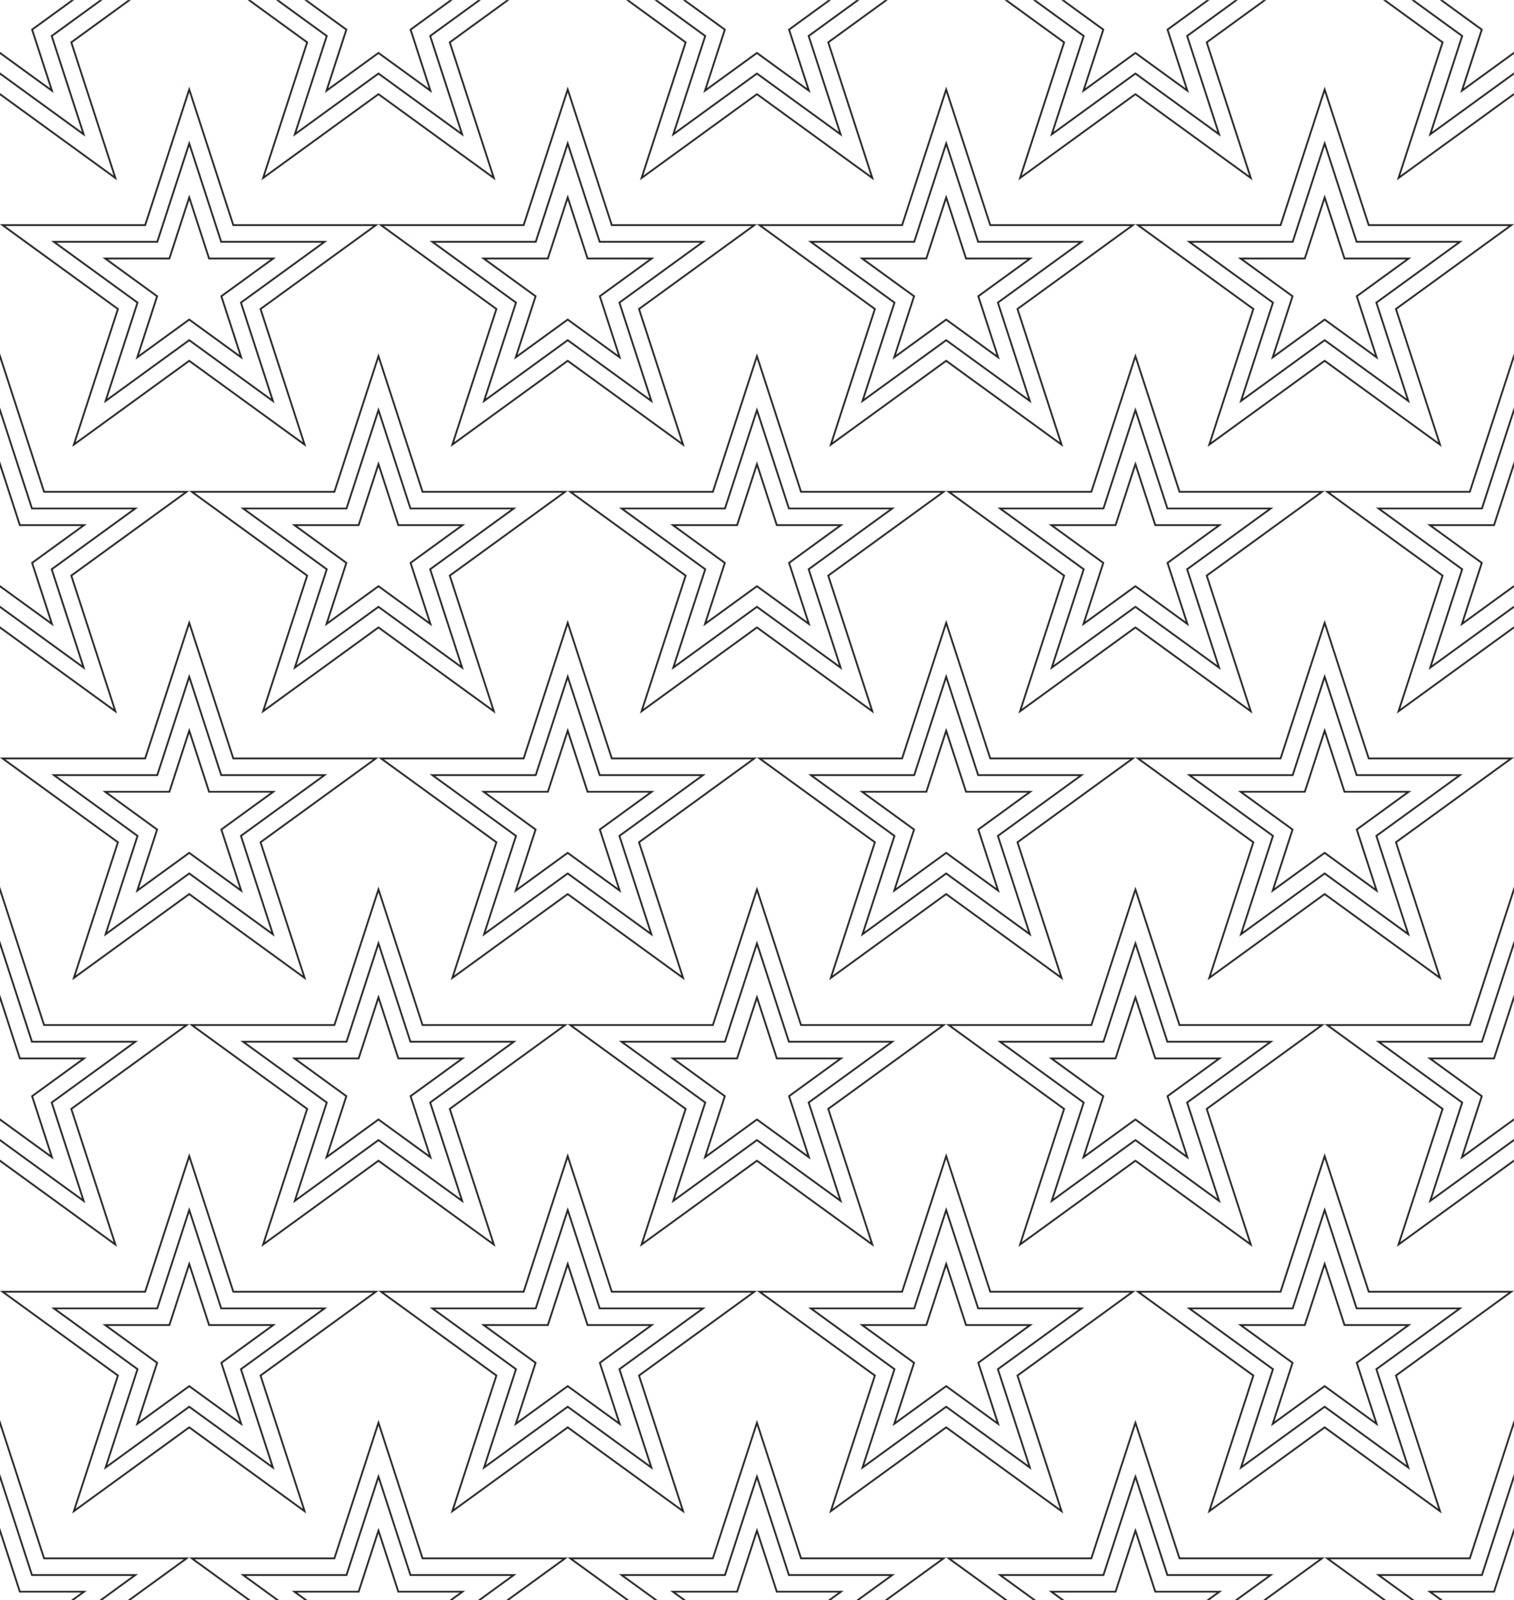 Vector uniform seamless pattern of stars drawn by uniform lines in black on a white background